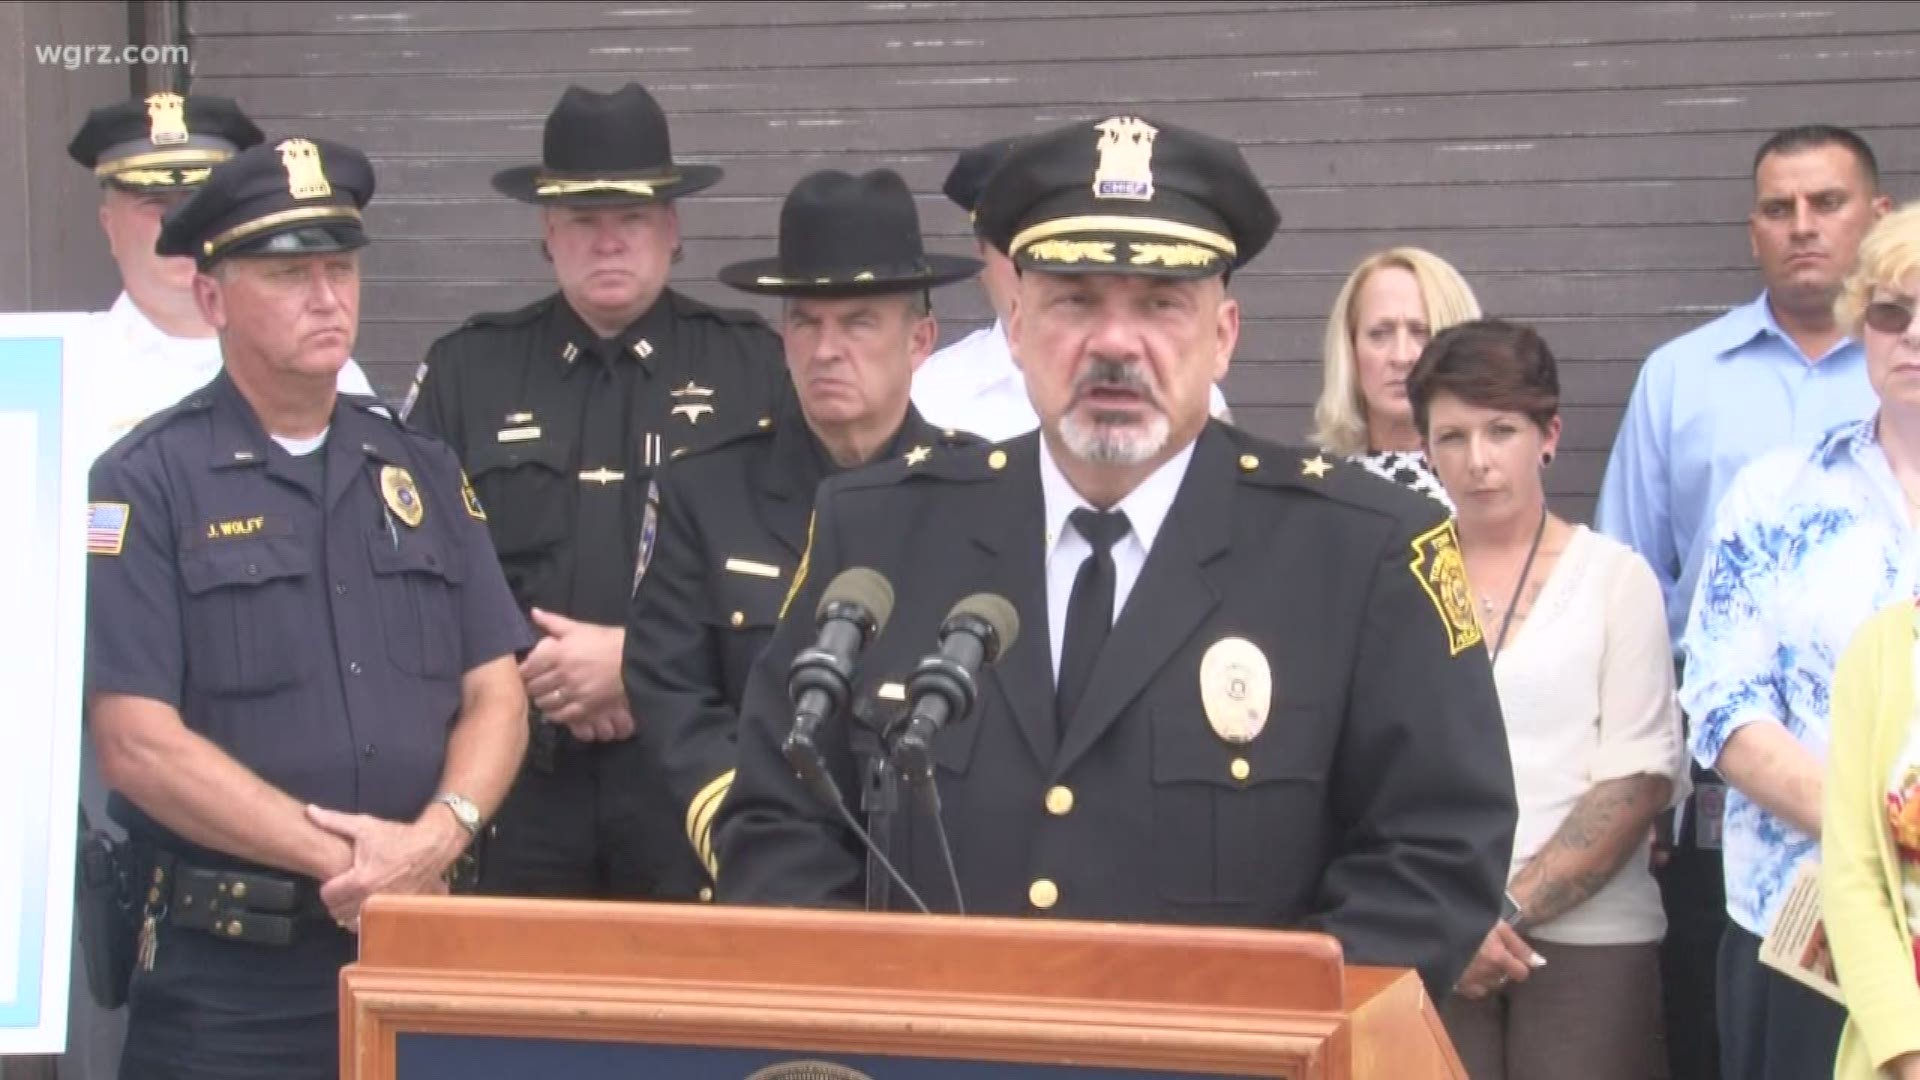 Town of Tonawanda police Chief Jerome Uschold is stepping down.